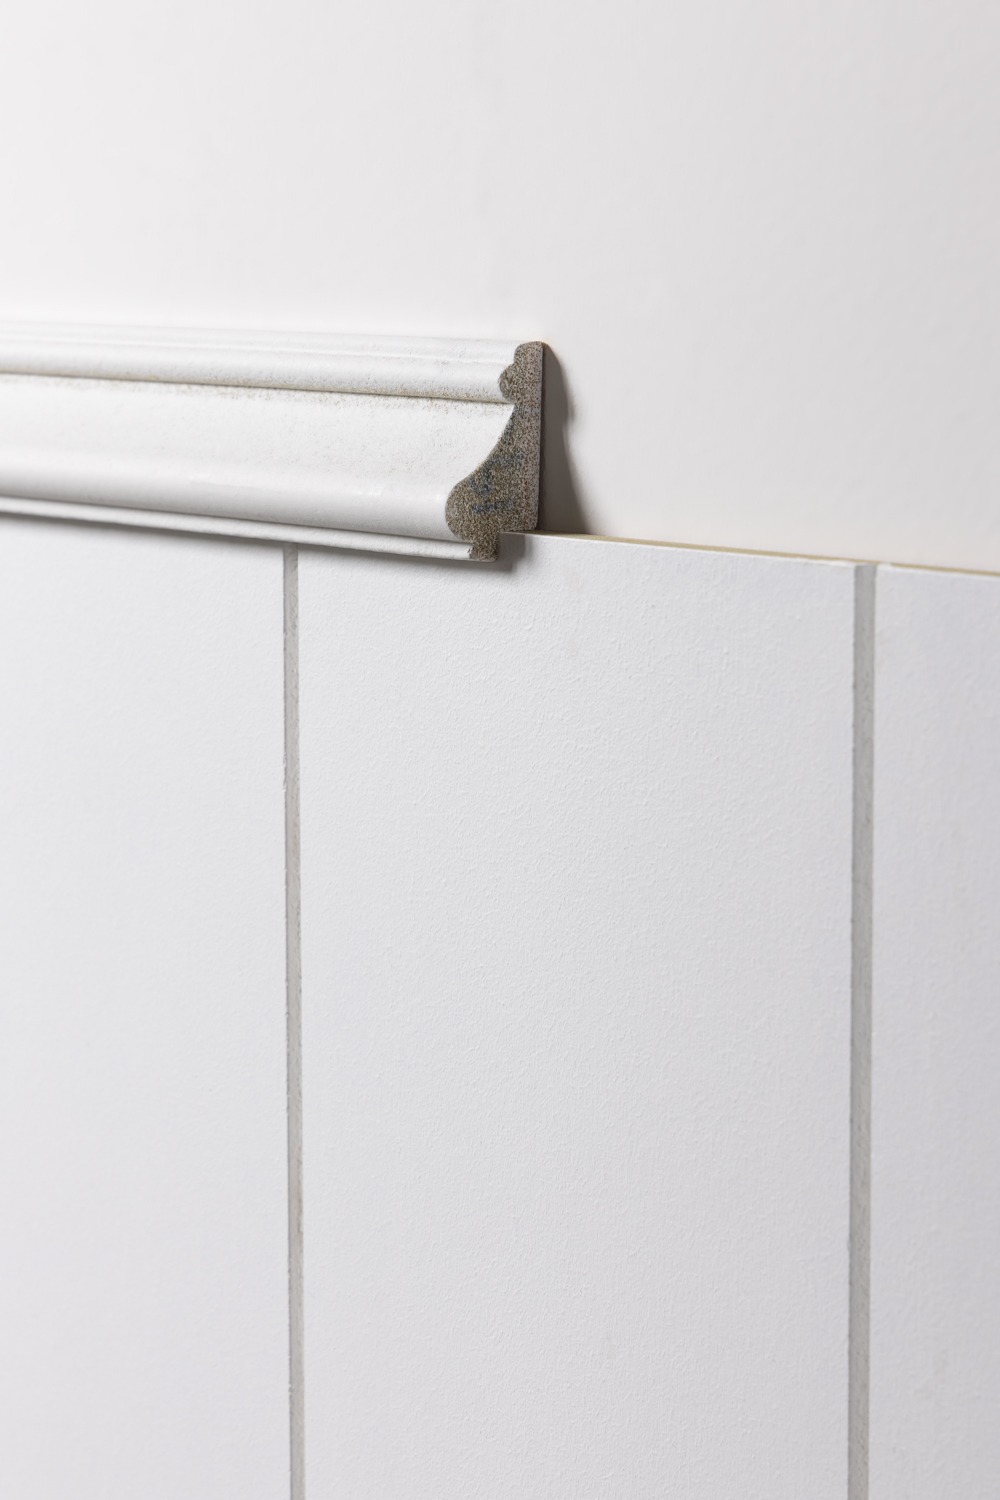 photo of a white dado rail being used as a top trip on wall panelling